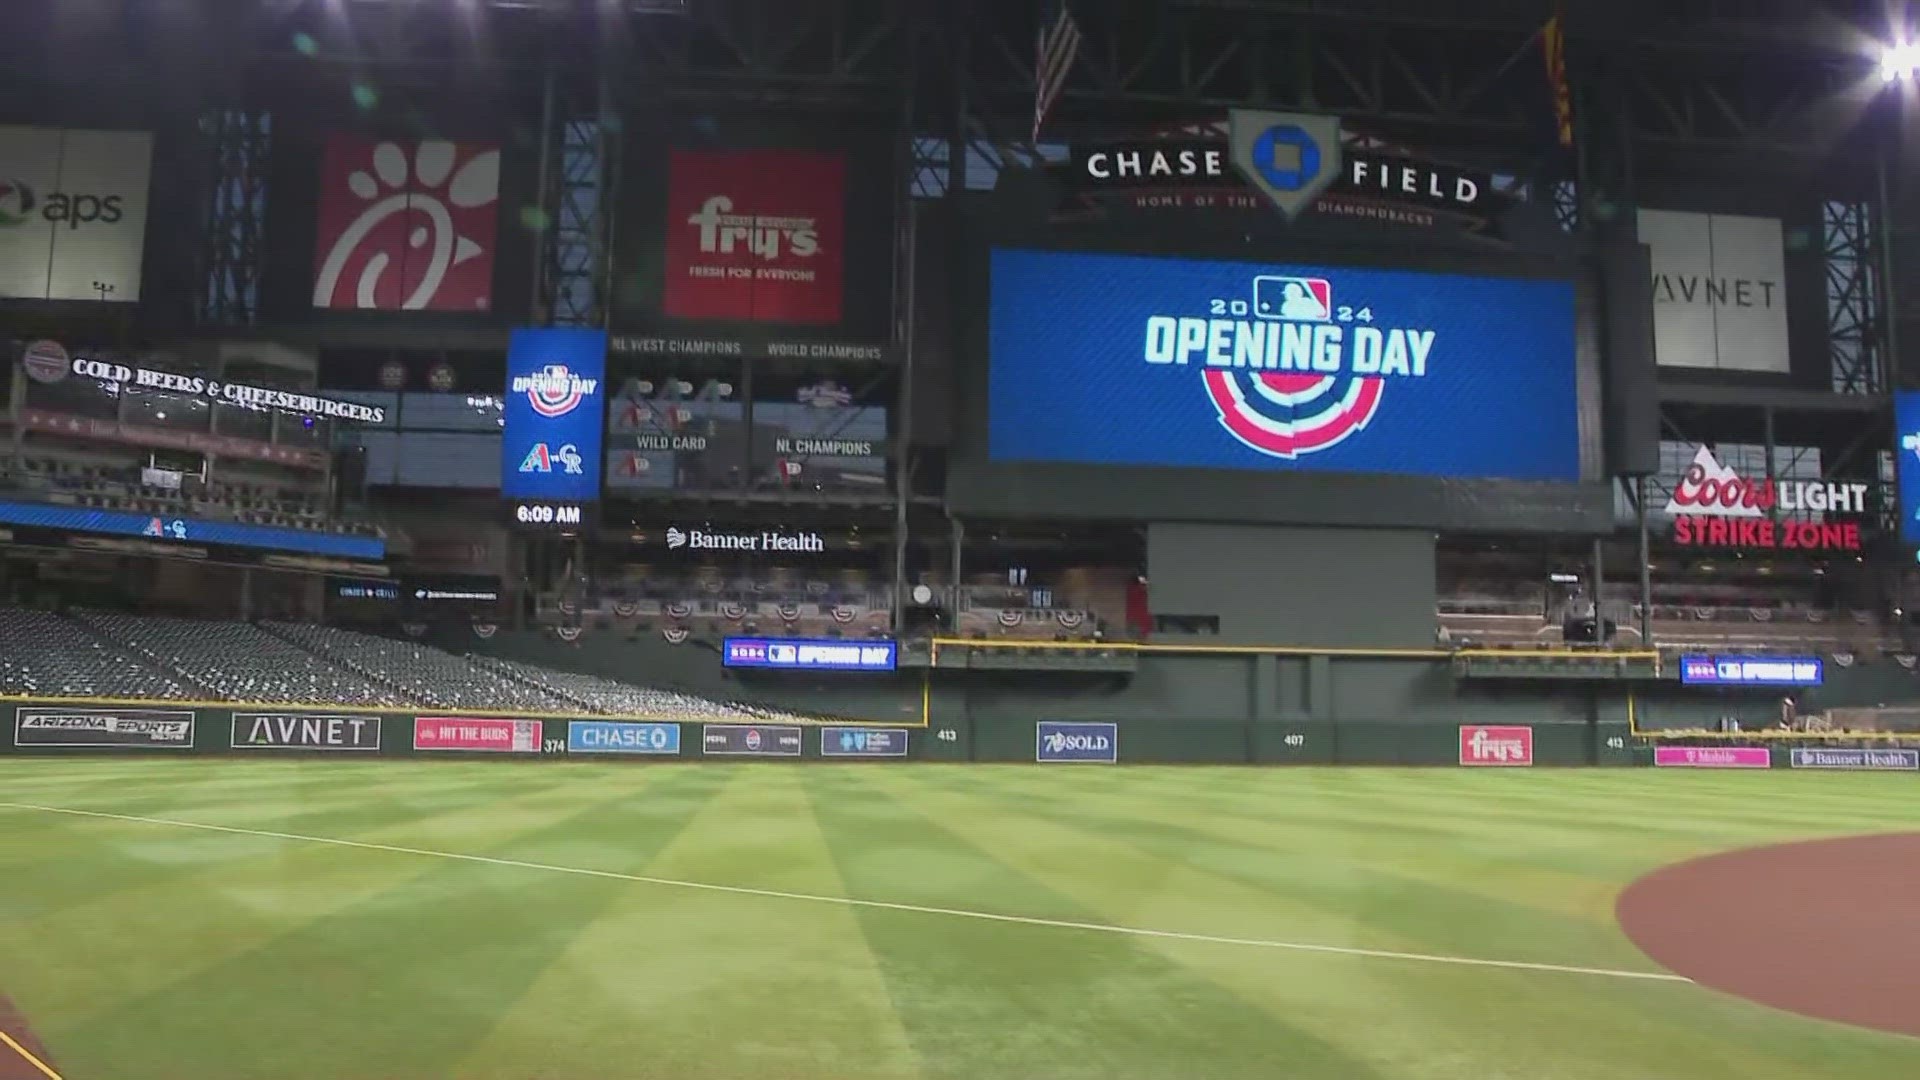 Opening Day is here and Chase Field is undergoing final preparations before the Arizona Diamondbacks take on the Colorado Rockies to start the season.